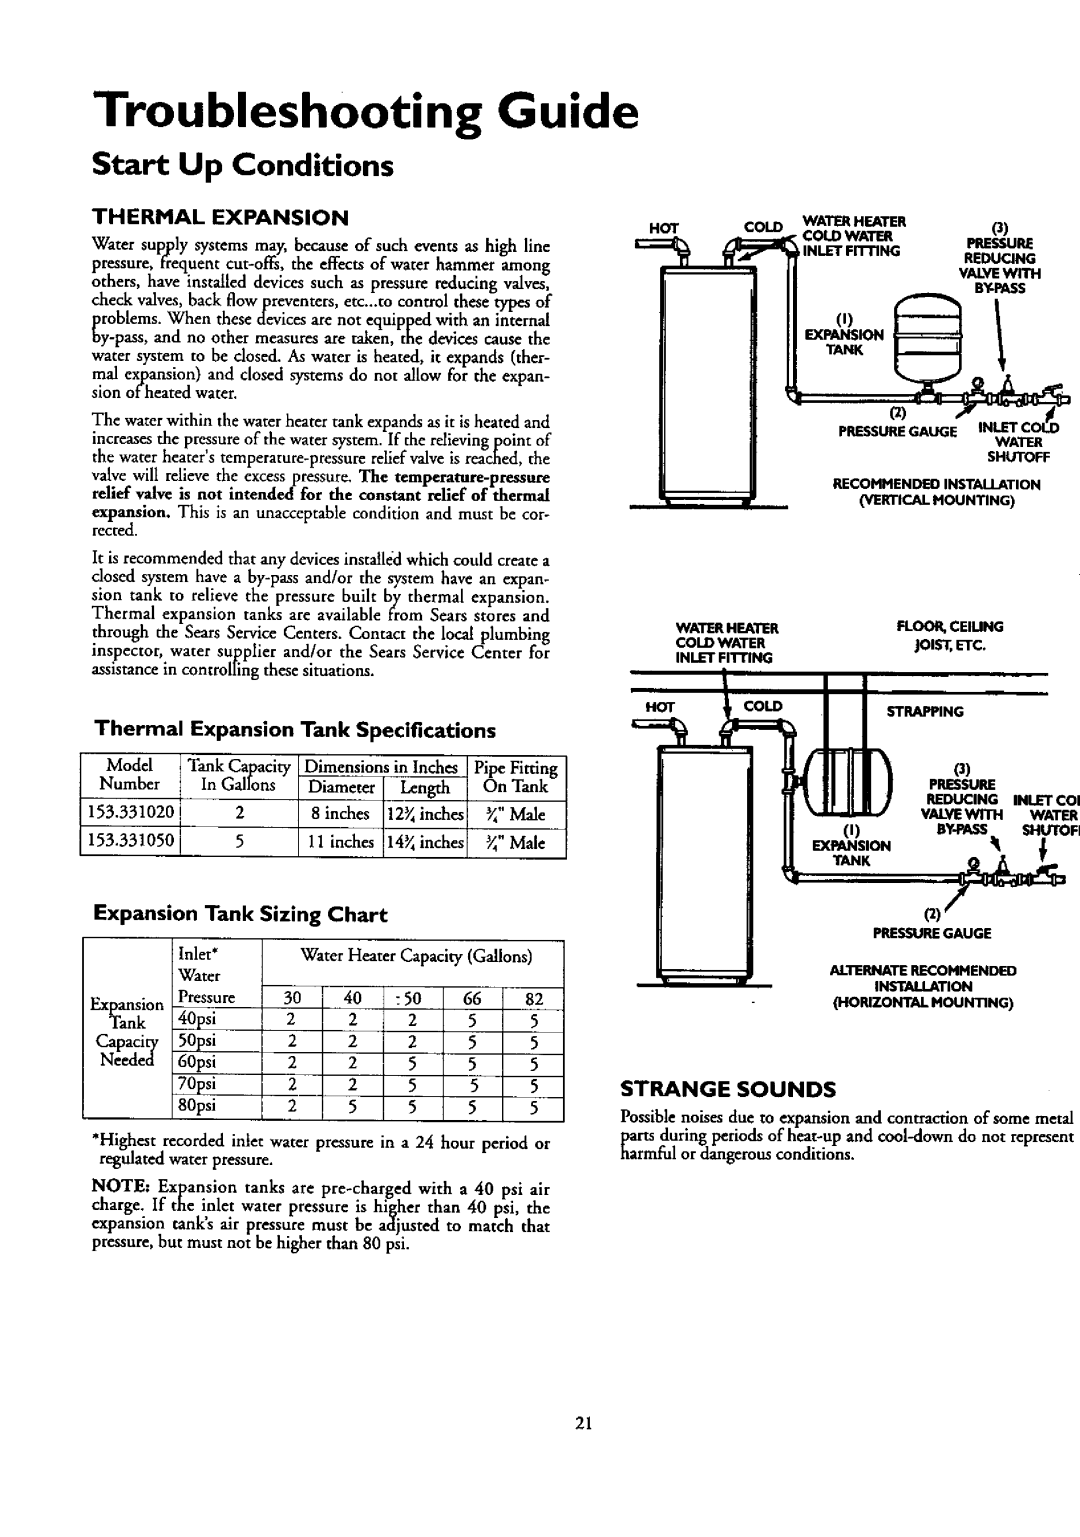 Kenmore 153.320891 HT 82 GAL Troubleshooting Guide, Start Up Conditions, Thermal Expansion Tank Specifications, Sizing 